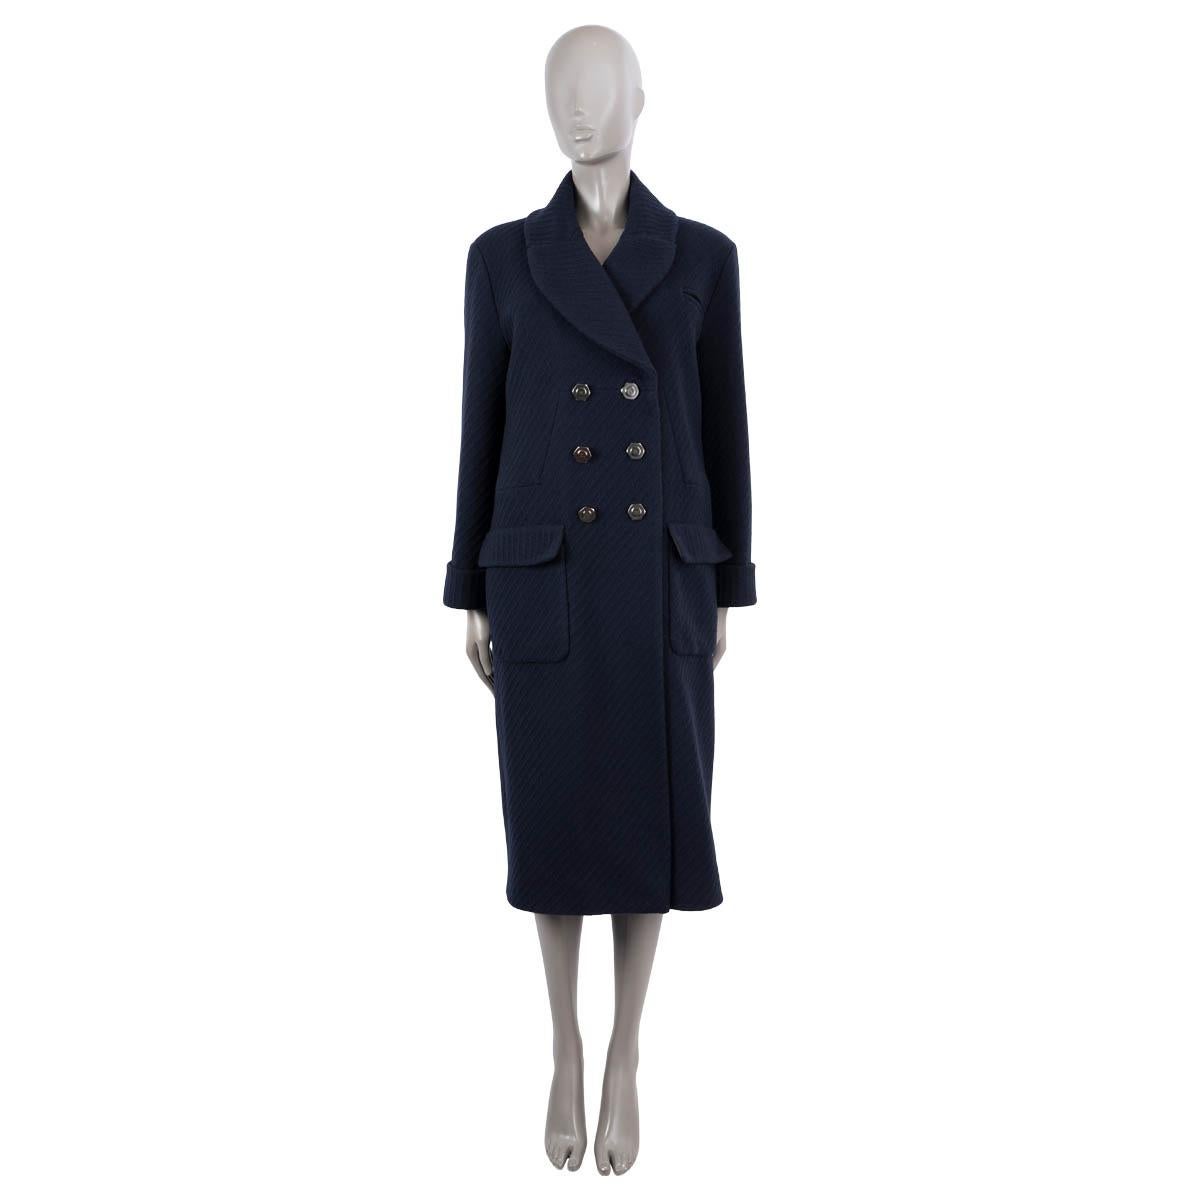 100% authentic Chanel double breasted textured coat in navy blue wool (90%) and cashmere (10%). The design features six gunmetal nut & bolt style buttons at front, two front flap patch pockets, a tiny slit chest pocket, buttoned cuffs, round lapel